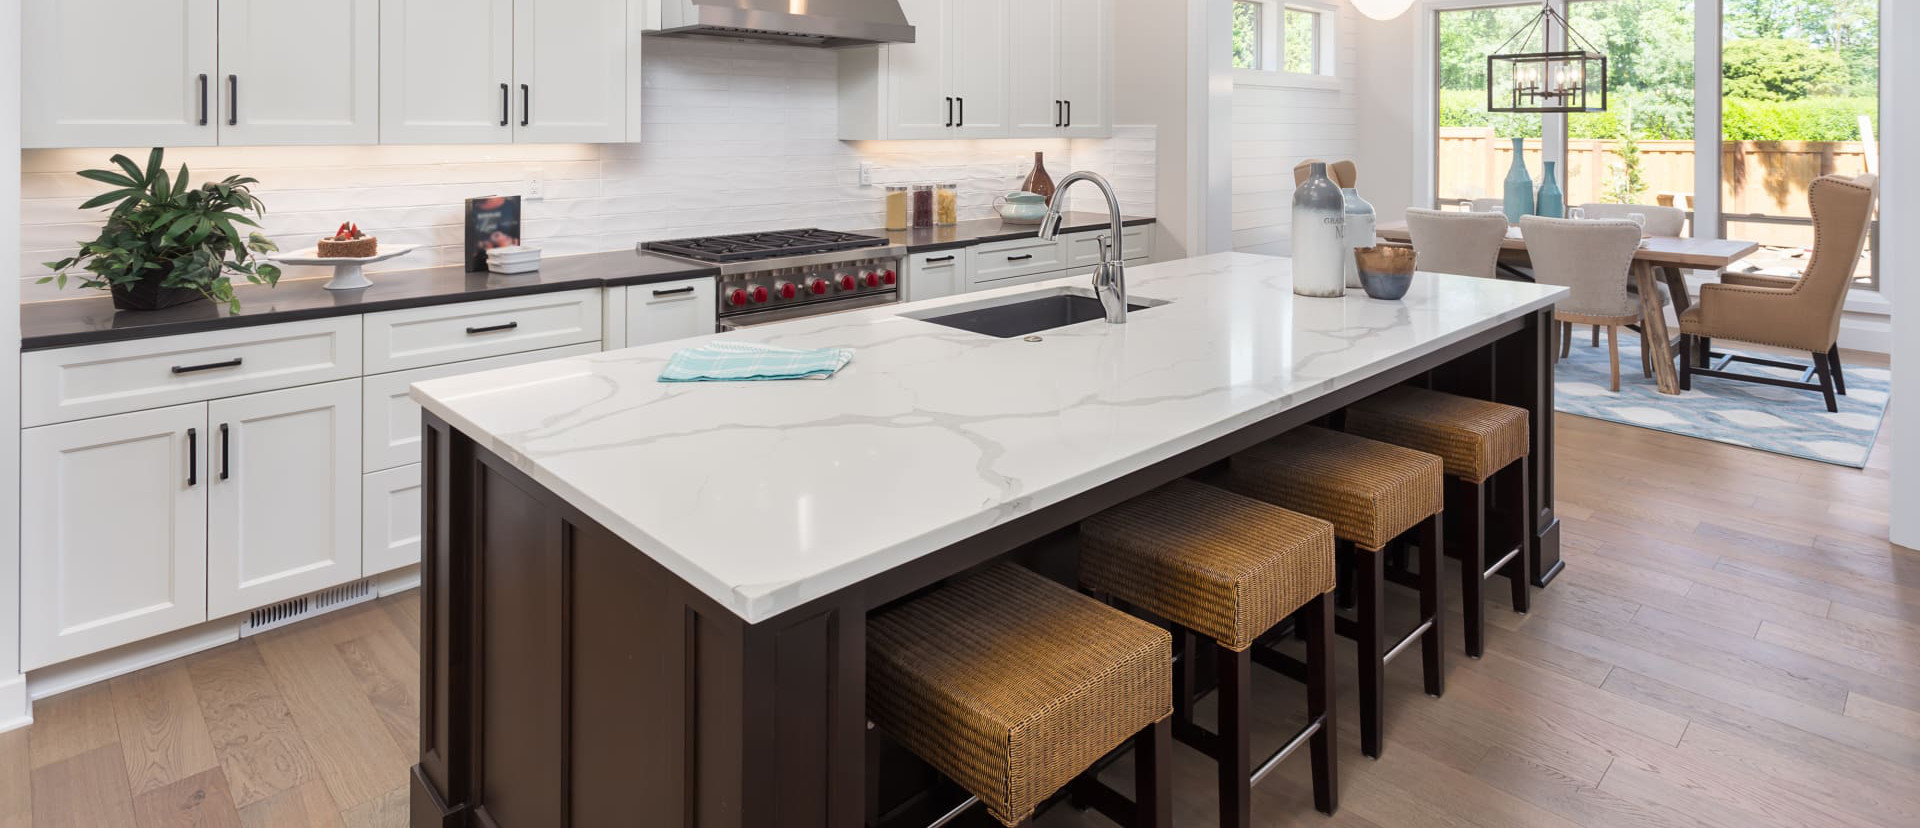 Reasons to choose the granite countertops for your kitchen